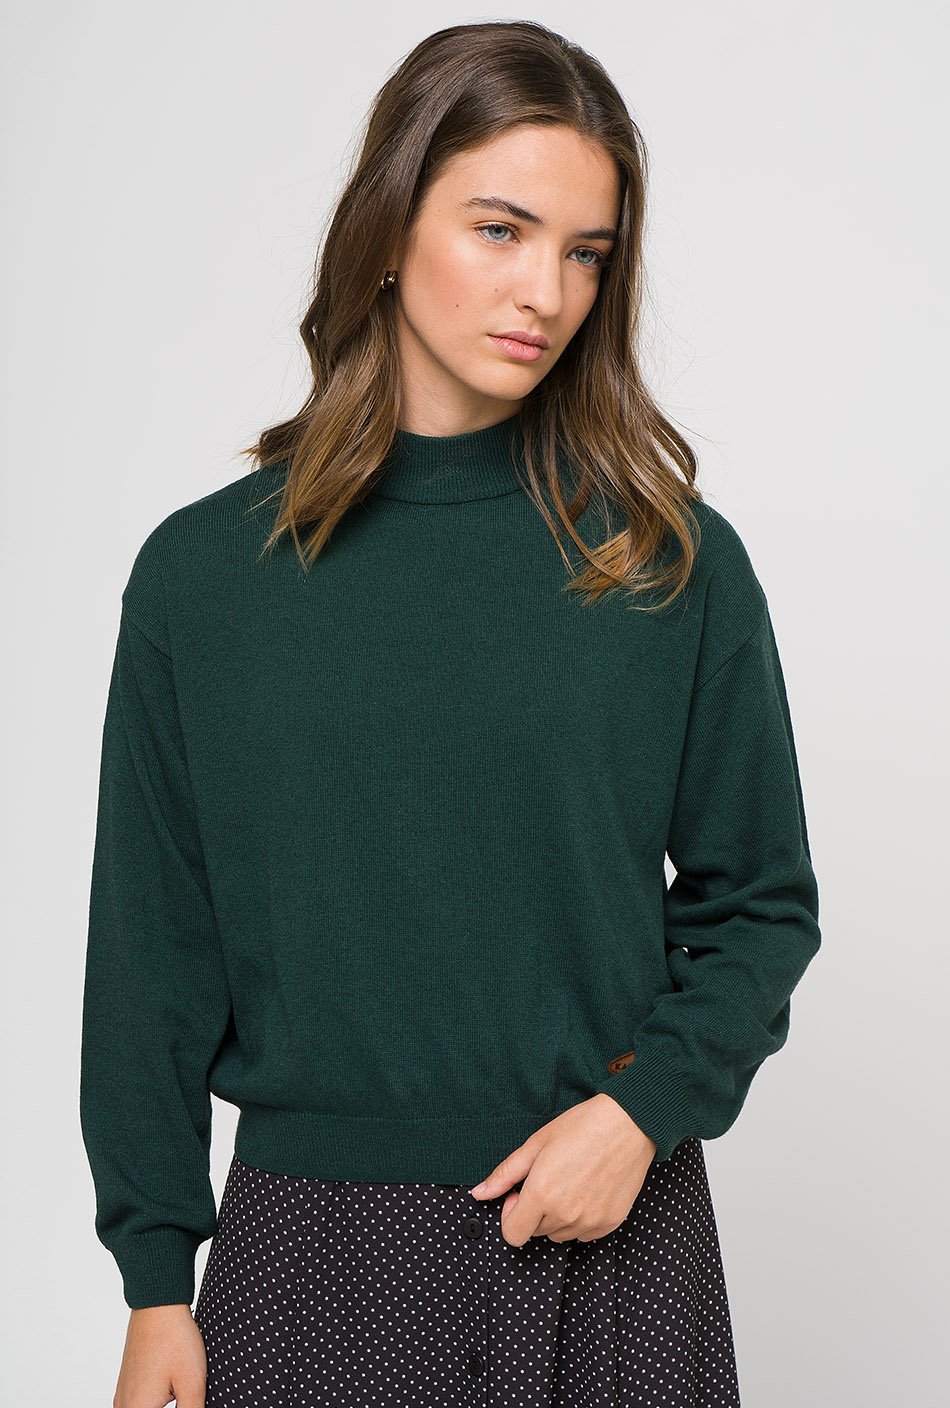 Perkins Soft Jade Knitted Sweater